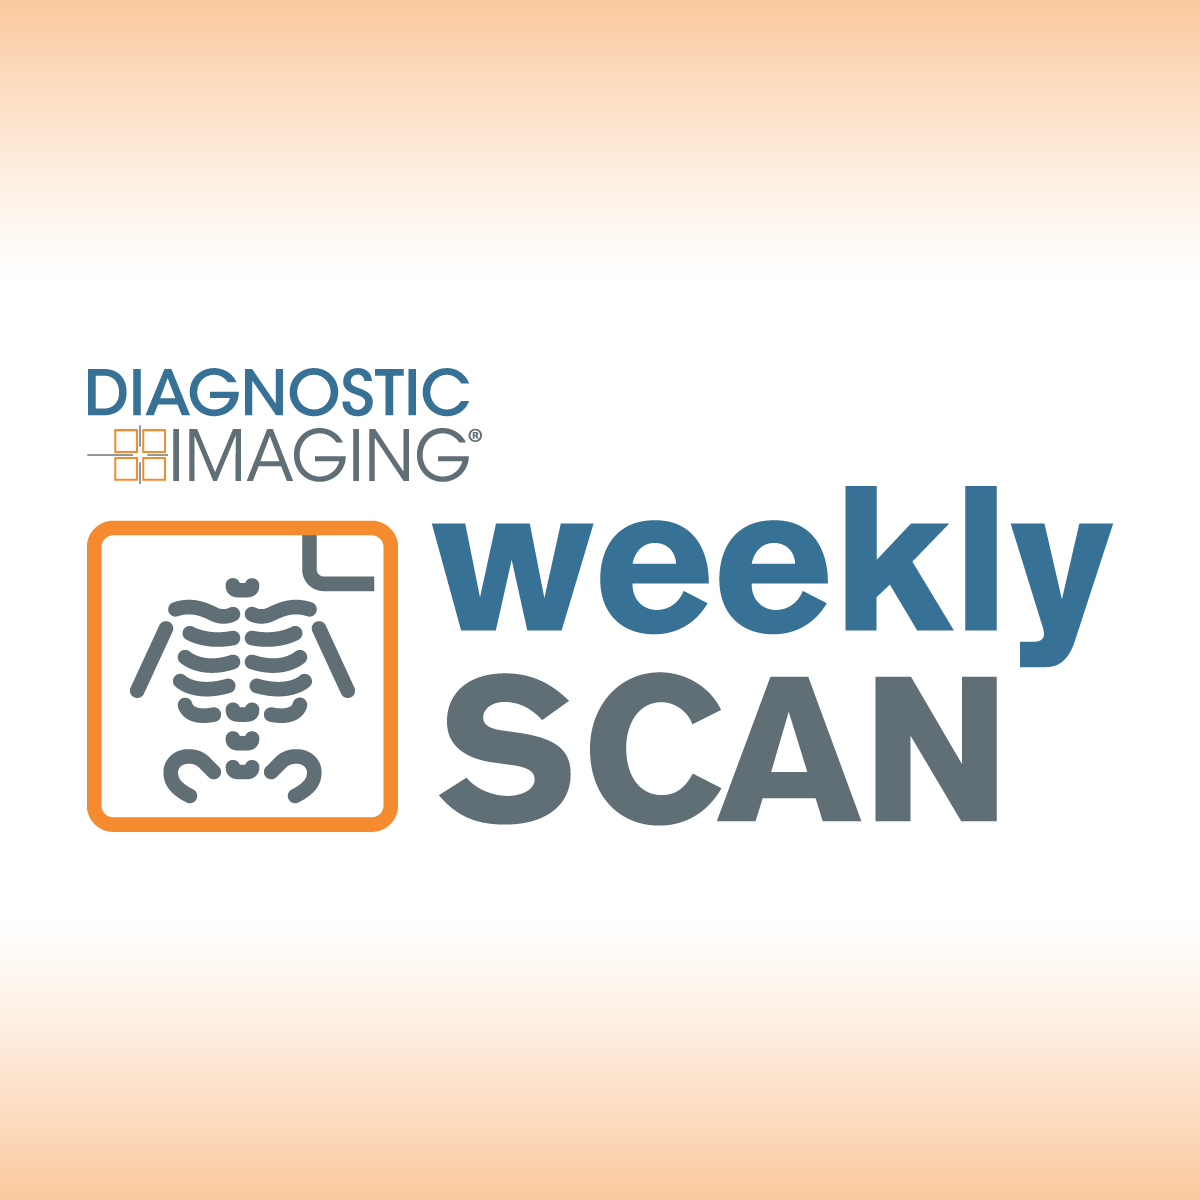 Diagnostic Imaging's Weekly Scan: February 4-February 10